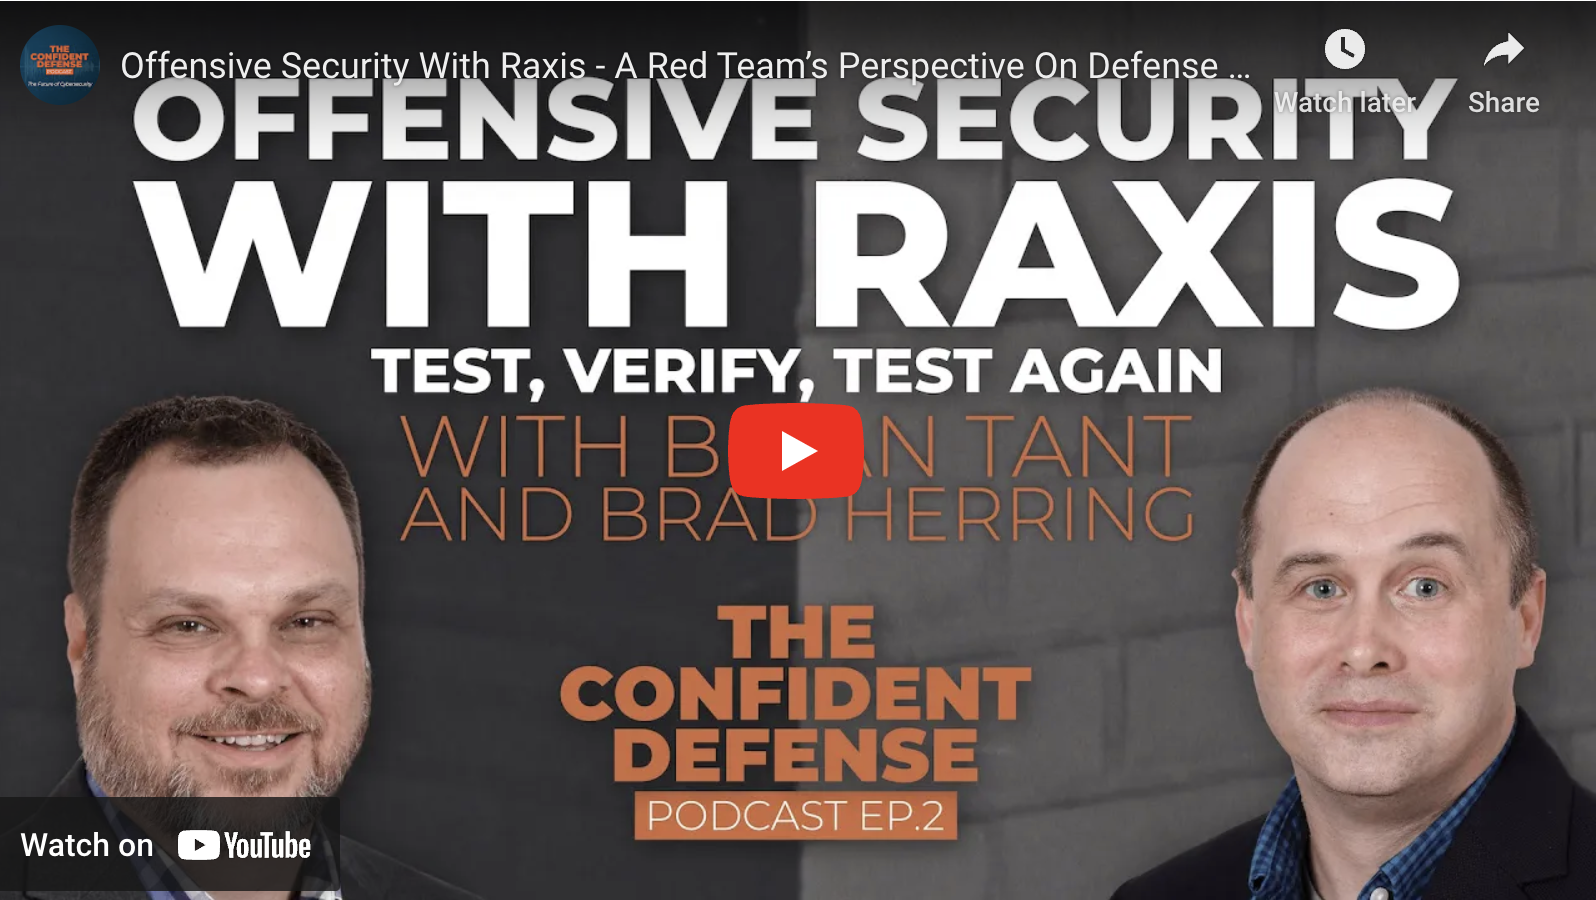 Offensive Security with Raxis Podcast